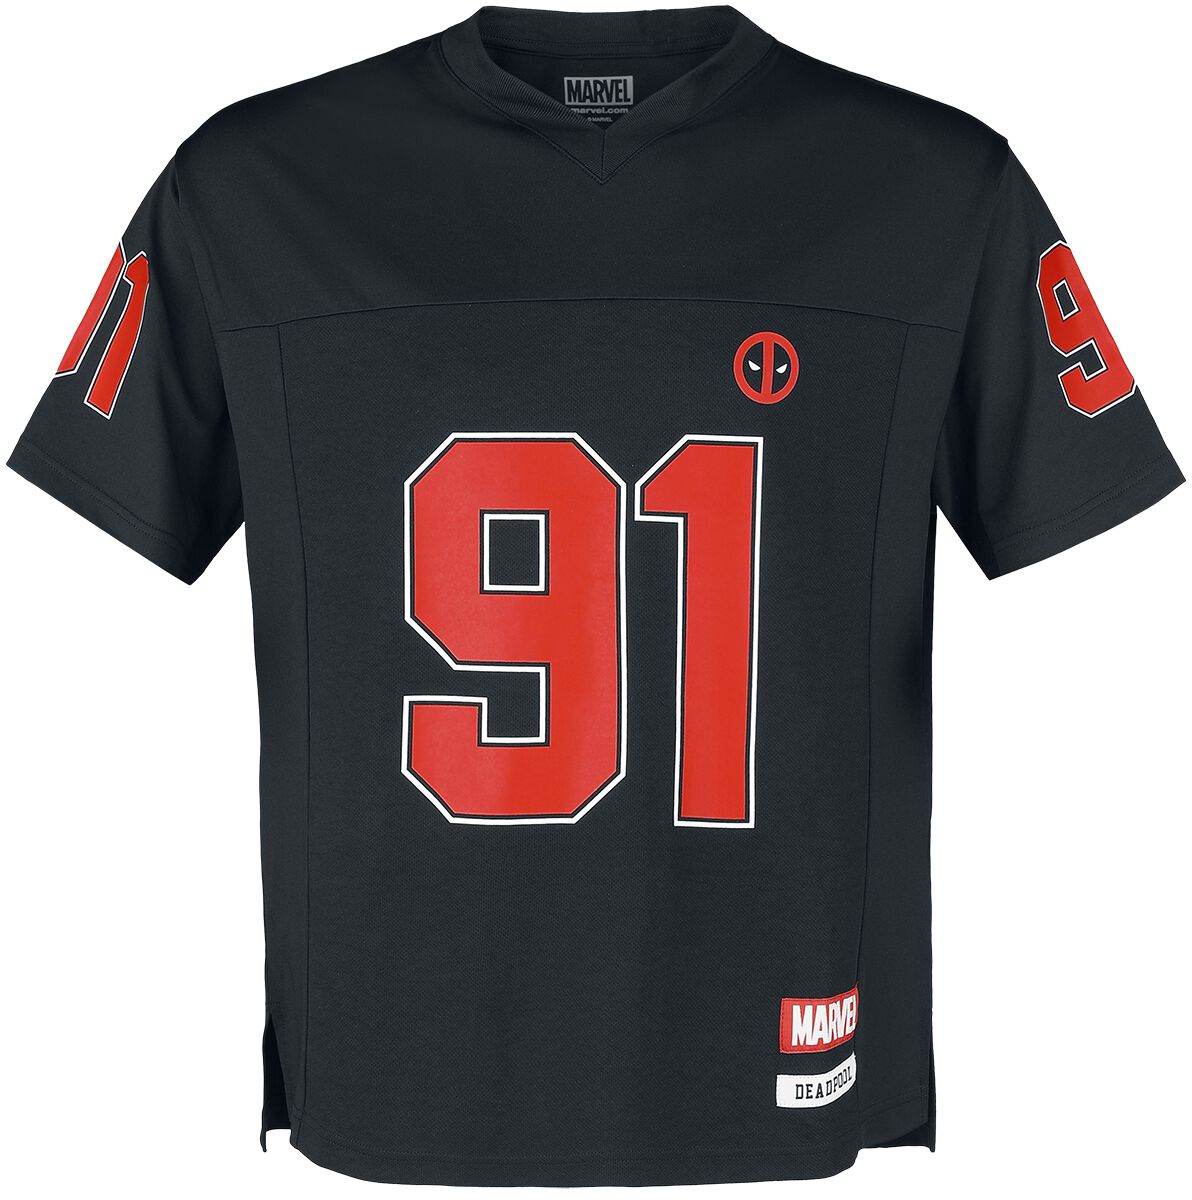 Deadpool Wade Wilson - Merc With A Mouth Jersey black